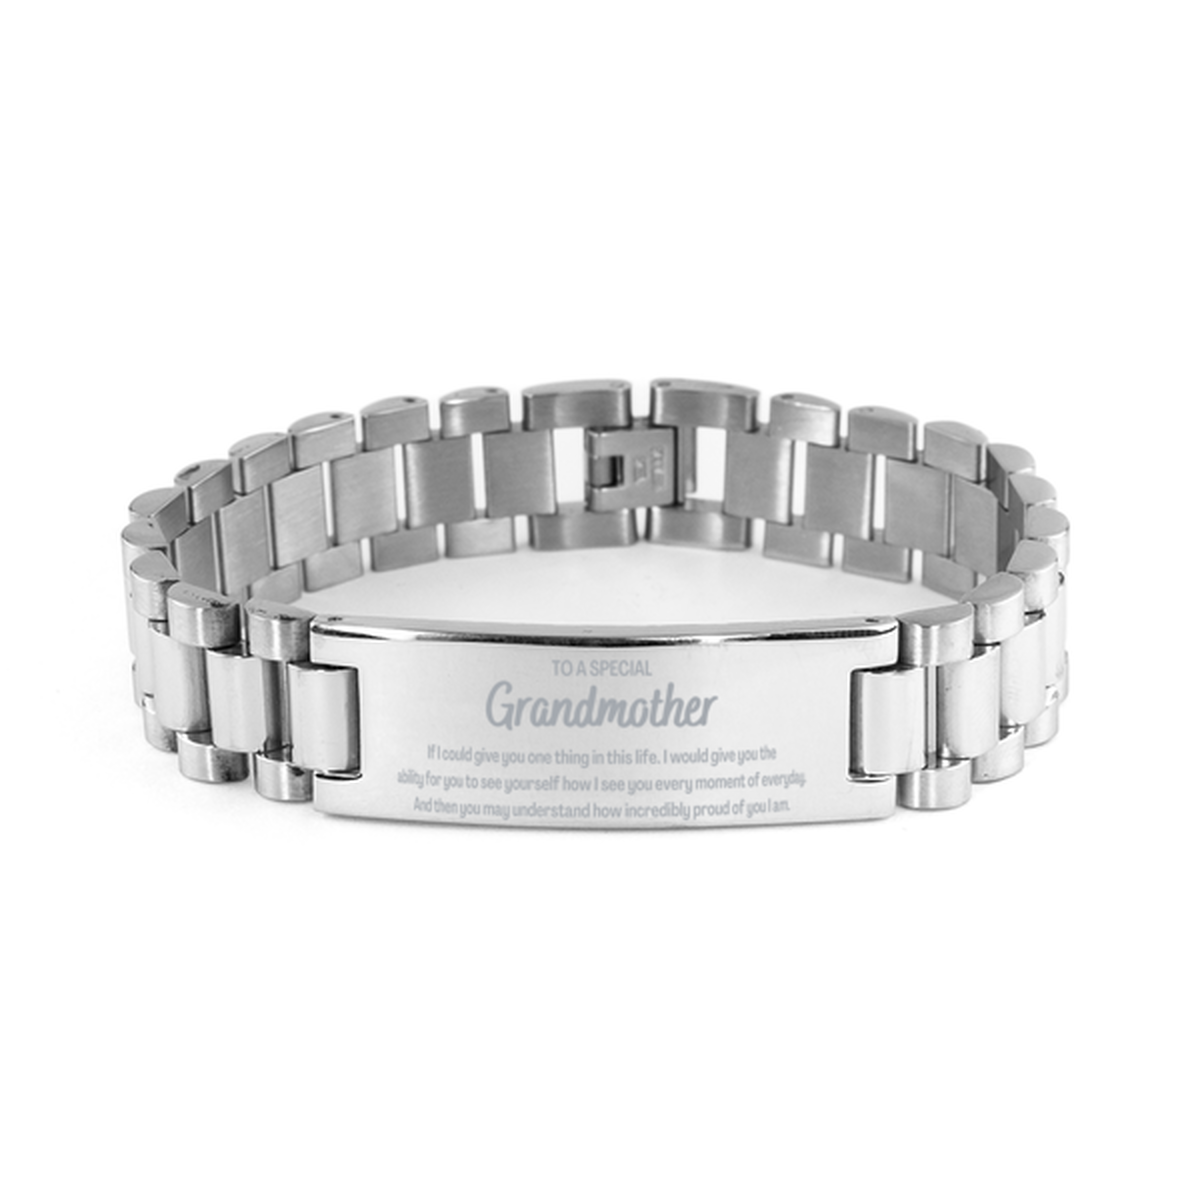 To My Grandmother Ladder Stainless Steel Bracelet, Gifts For Grandmother Engraved, Inspirational Gifts for Christmas Birthday, Epic Gifts for Grandmother To A Special Grandmother how incredibly proud of you I am